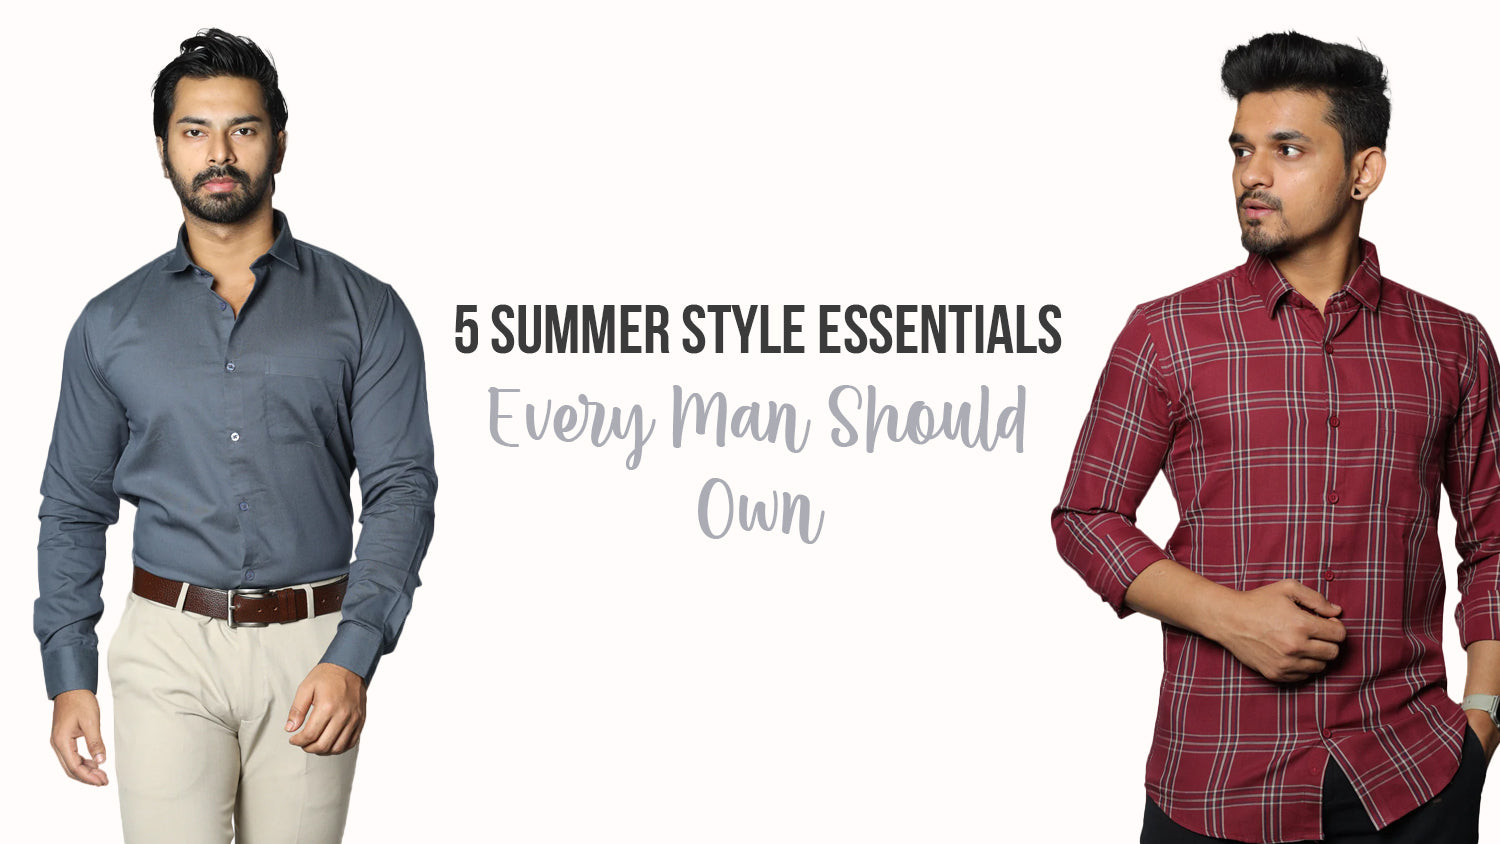 5 Summer Style Essentials Every Man Should Own